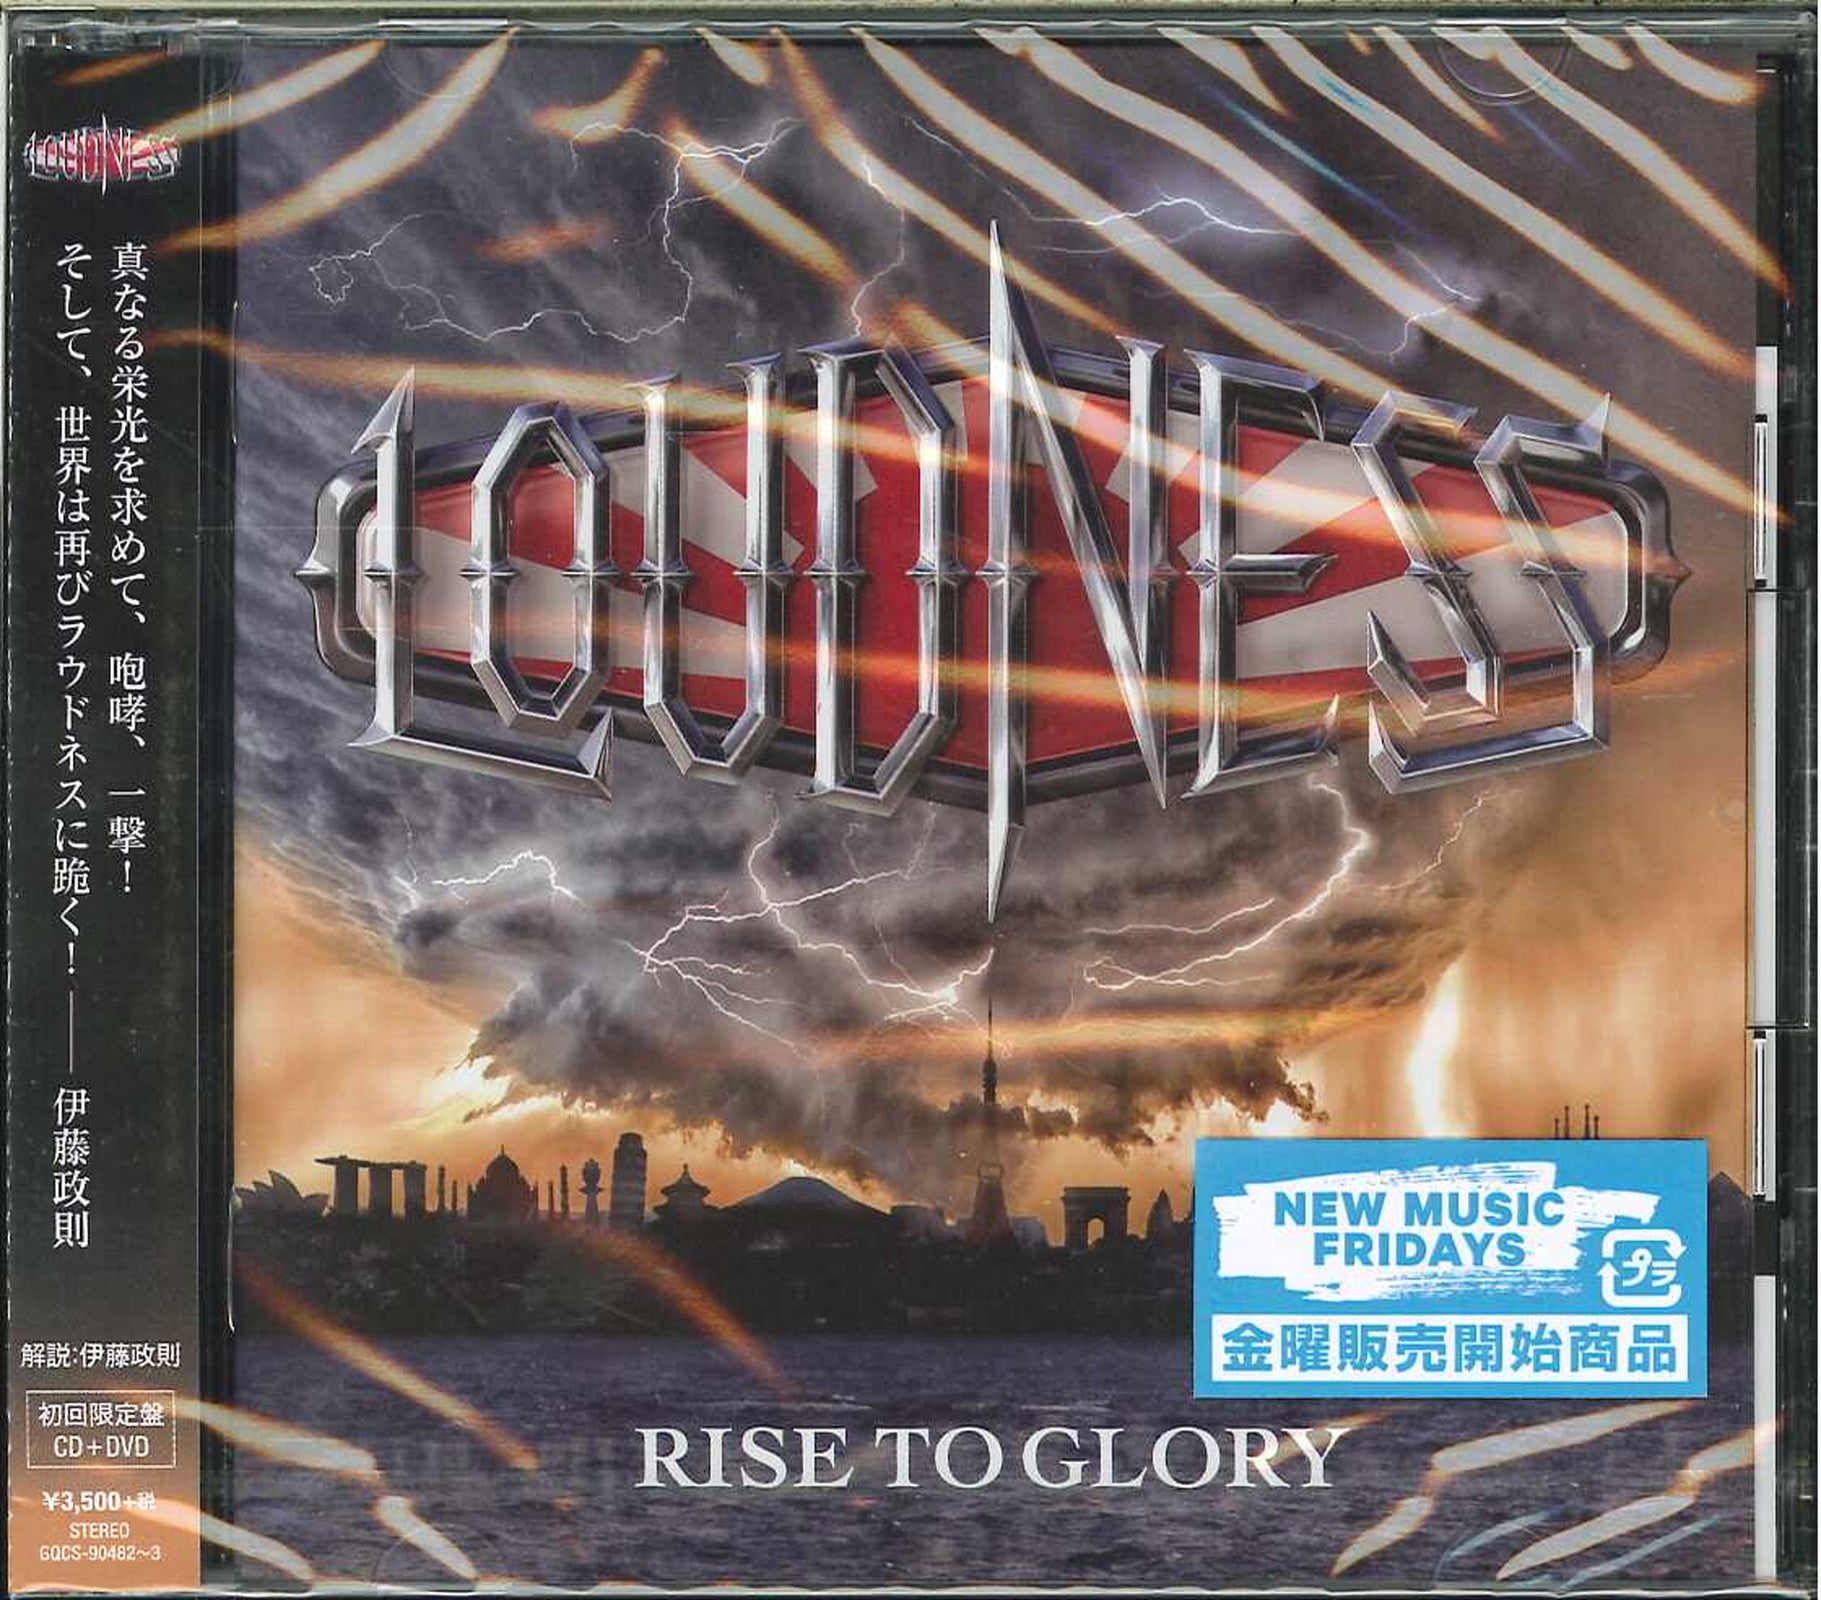 Loudness - Rise To Glory - Japan CD+DVD Limited Edition – CDs 